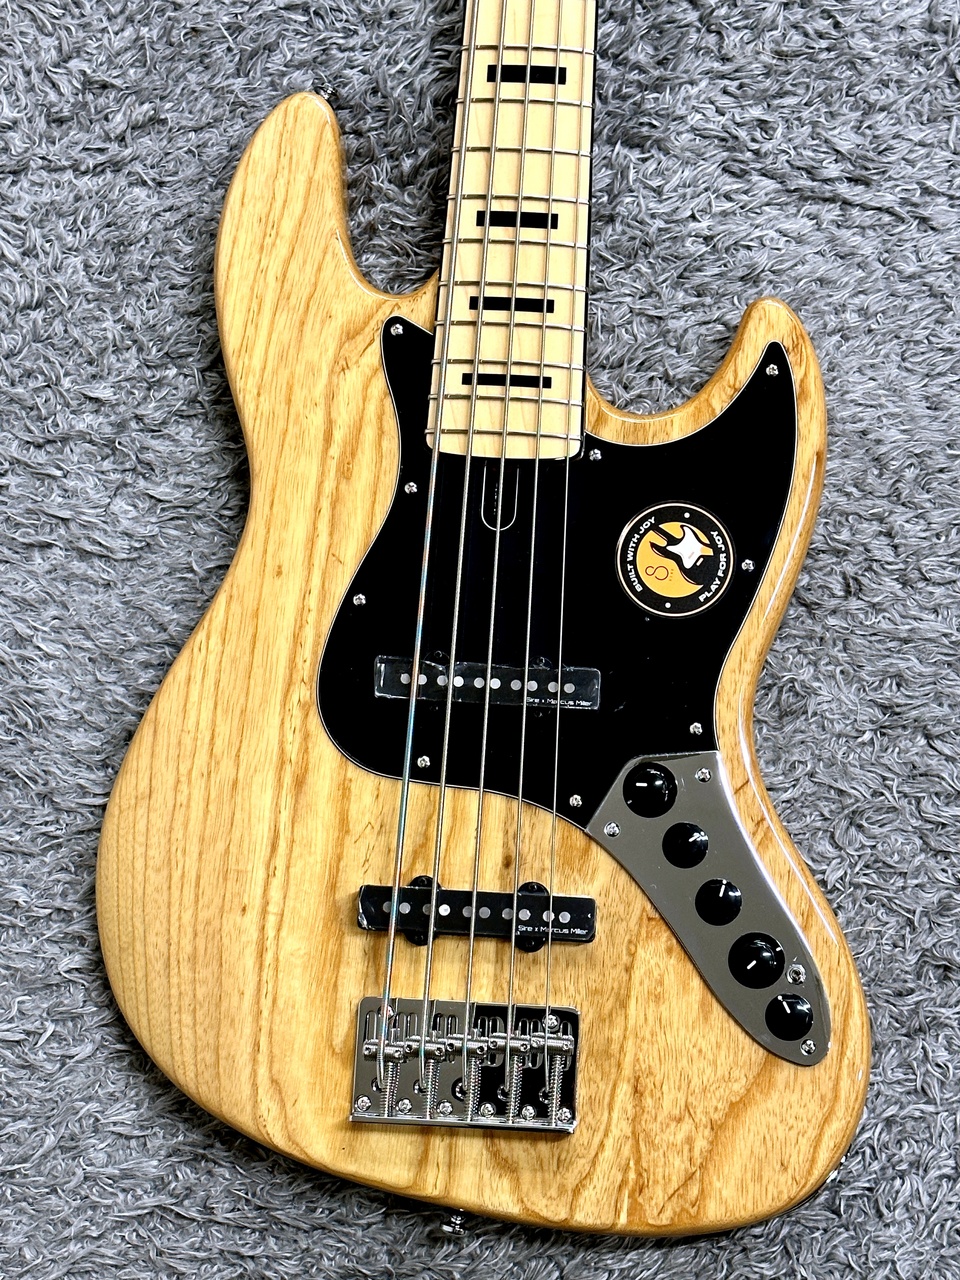 Sire V7 Vintage Ash 5st NT (Natural) -2nd Generation- with Marcus